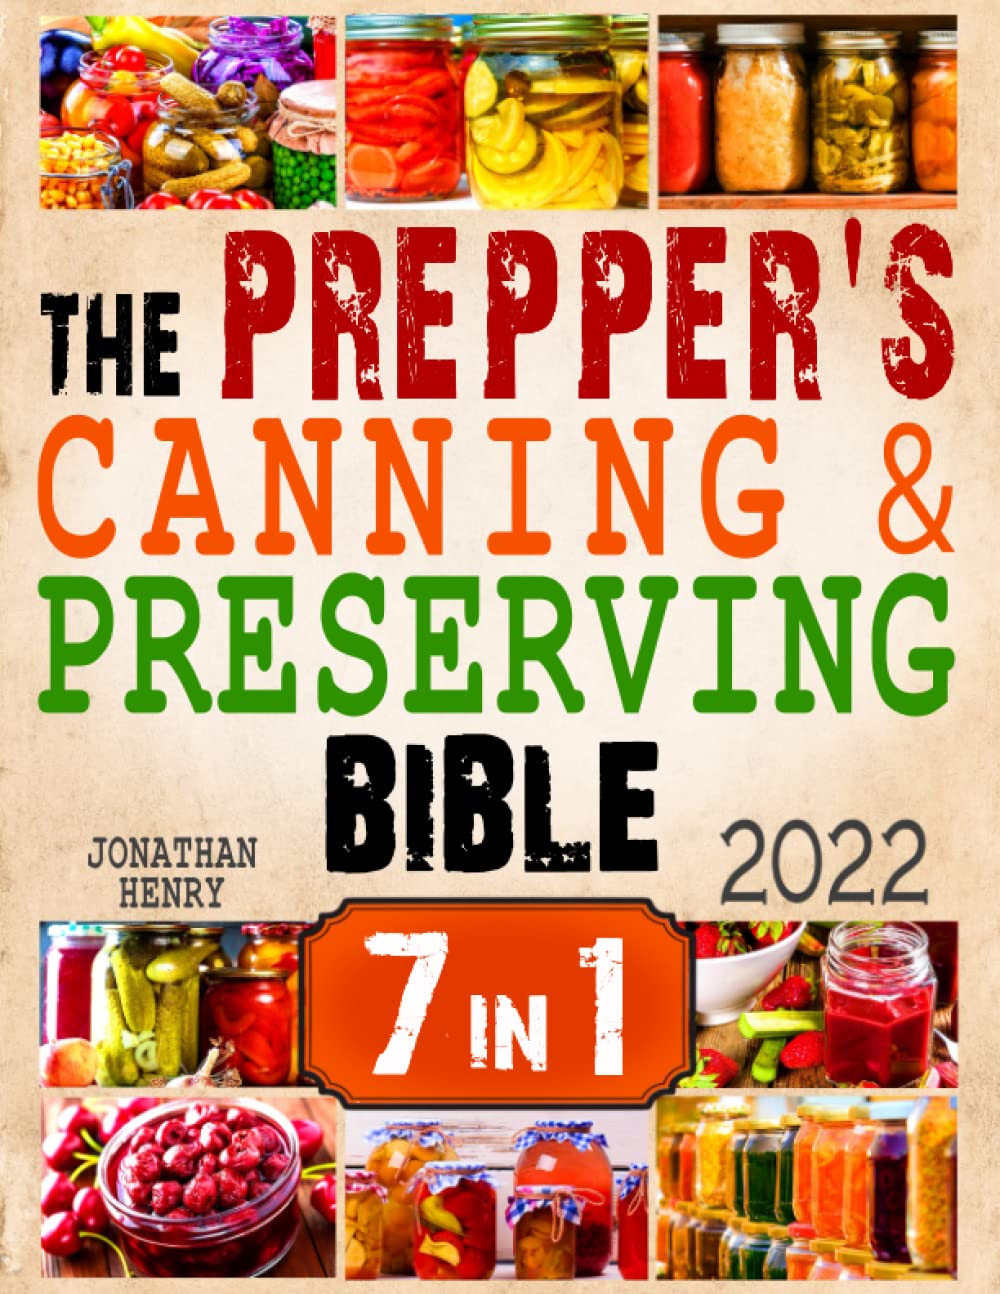 The Prepper’s Canning & Preserving Bible: 7 in 1. The Ultimate Guide to Water Bath & Pressure Canning, Dehydrating, Fermenting, Freezing, and Pickling to Stockpiling Food. Prepare for The Worst!